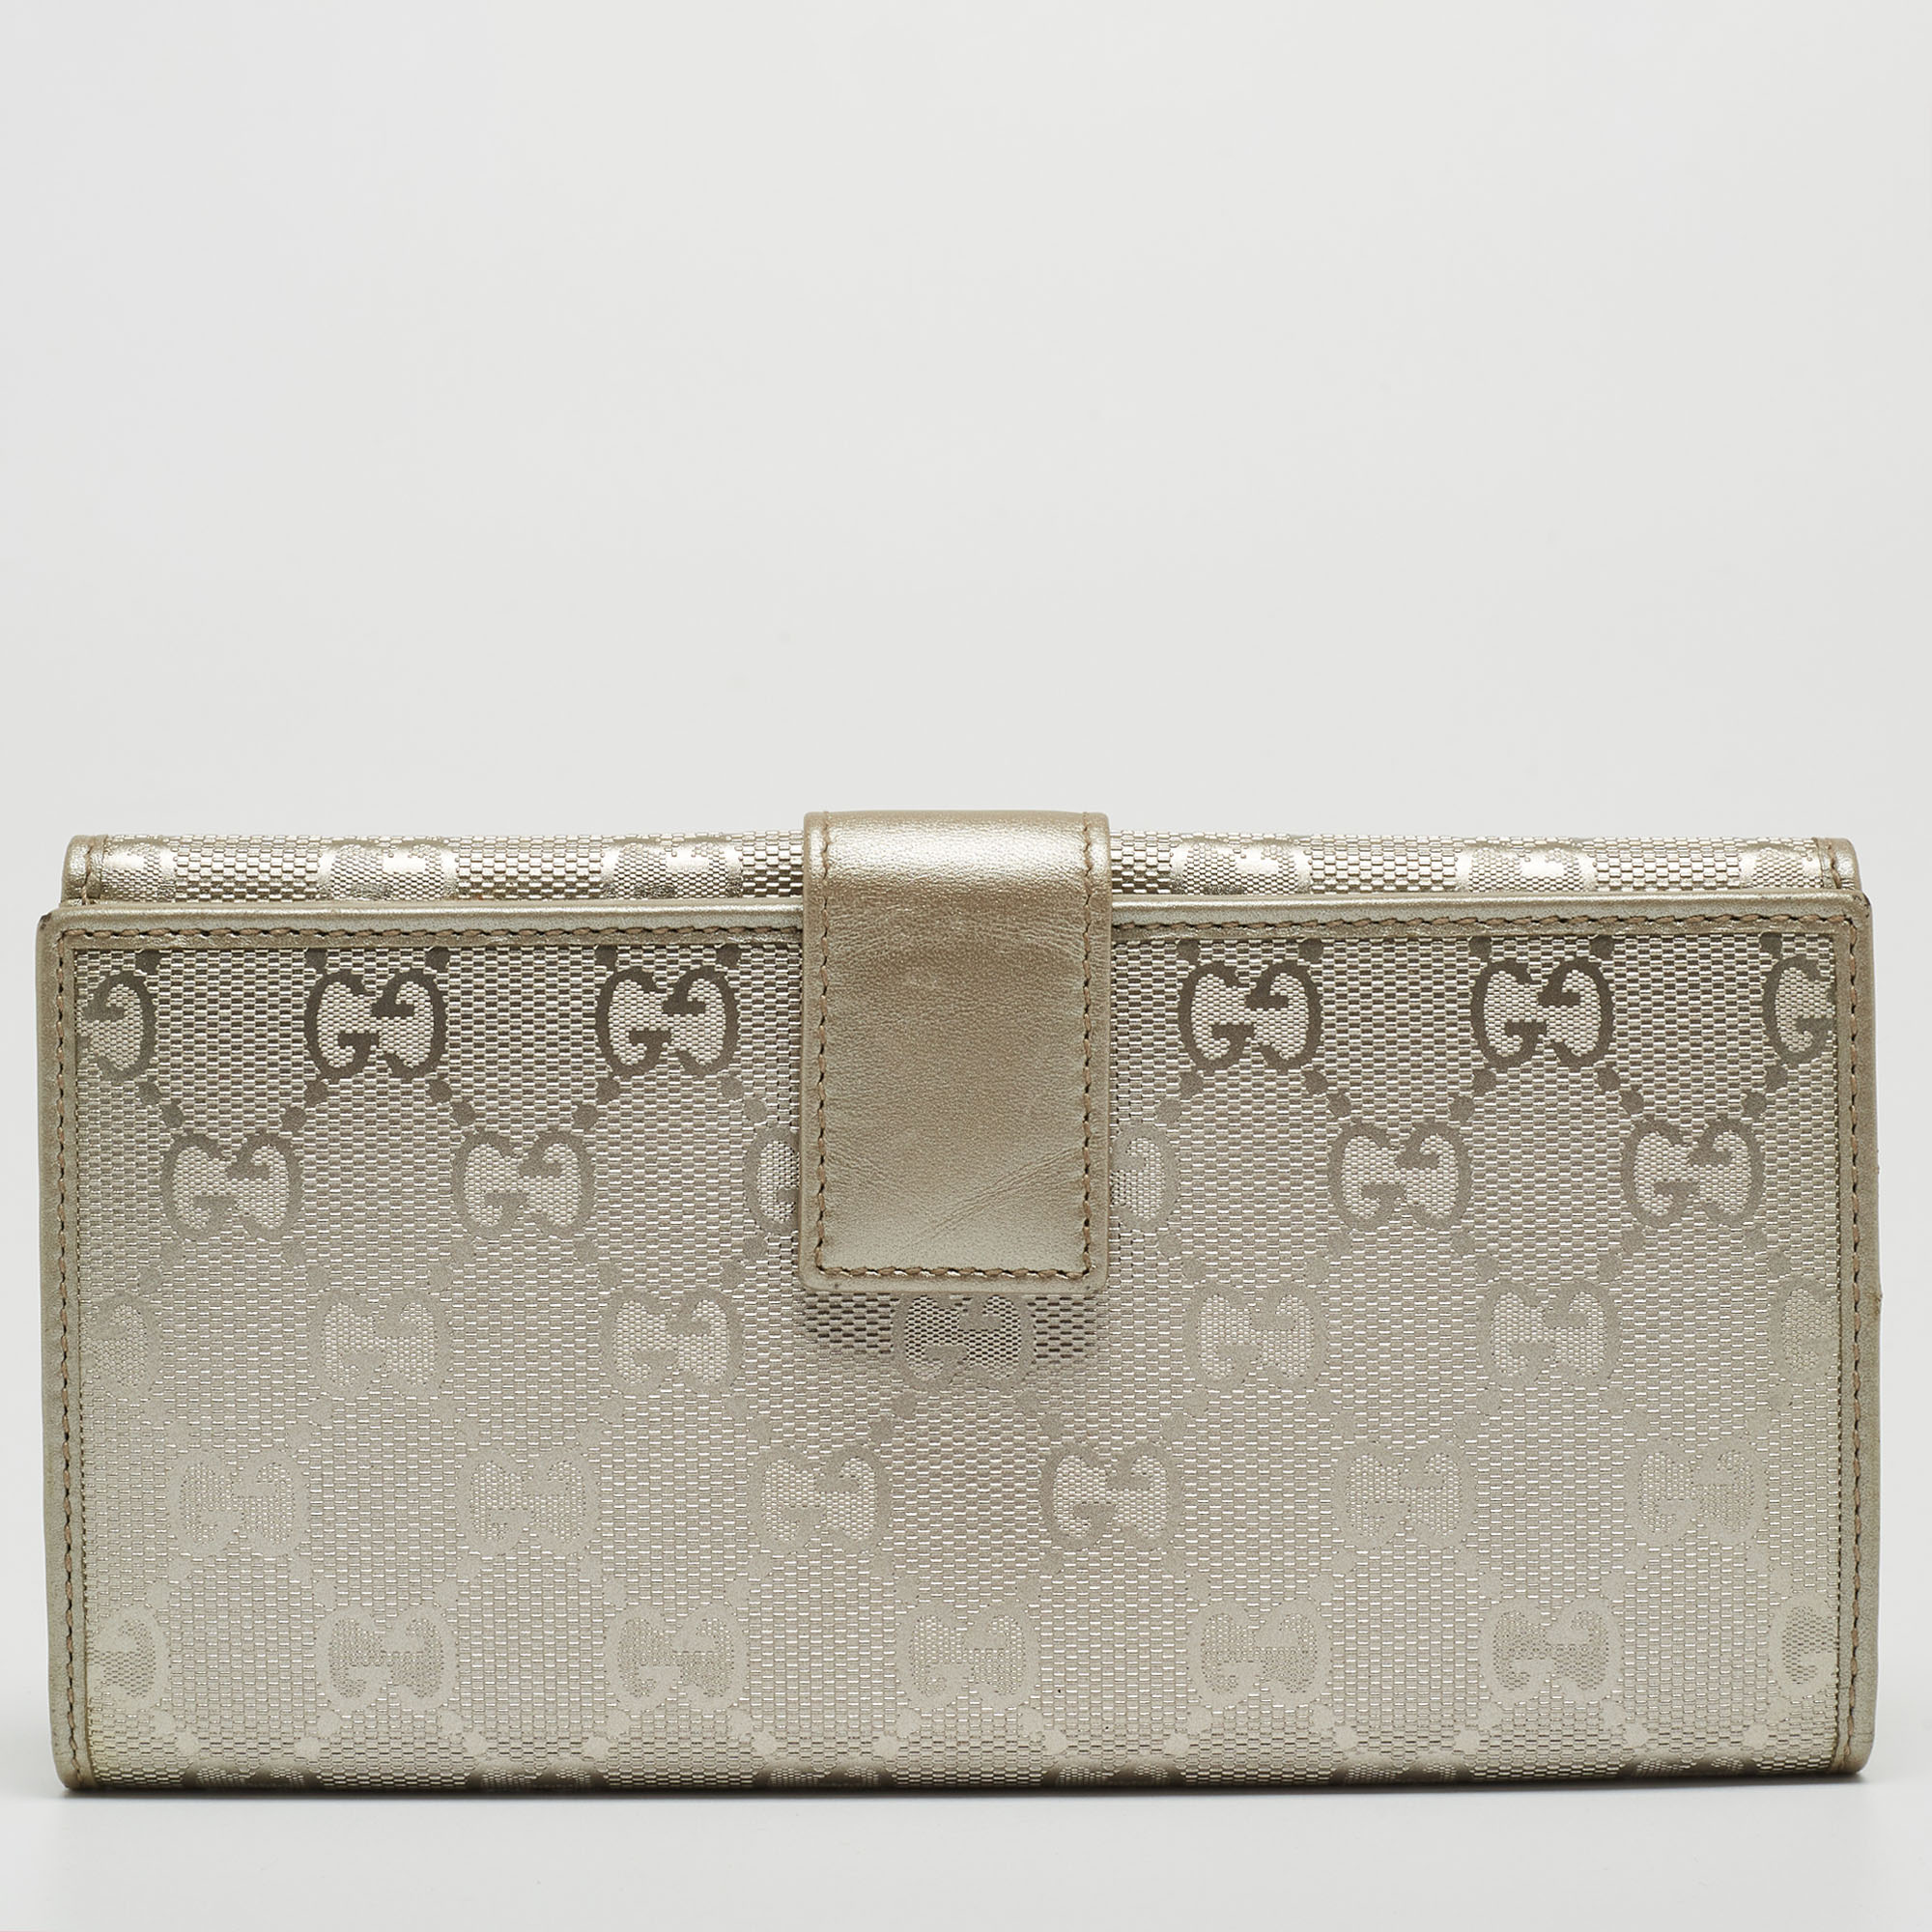 Gucci Metallic GG Imprime And Leather Interlocking G Continental Wallet